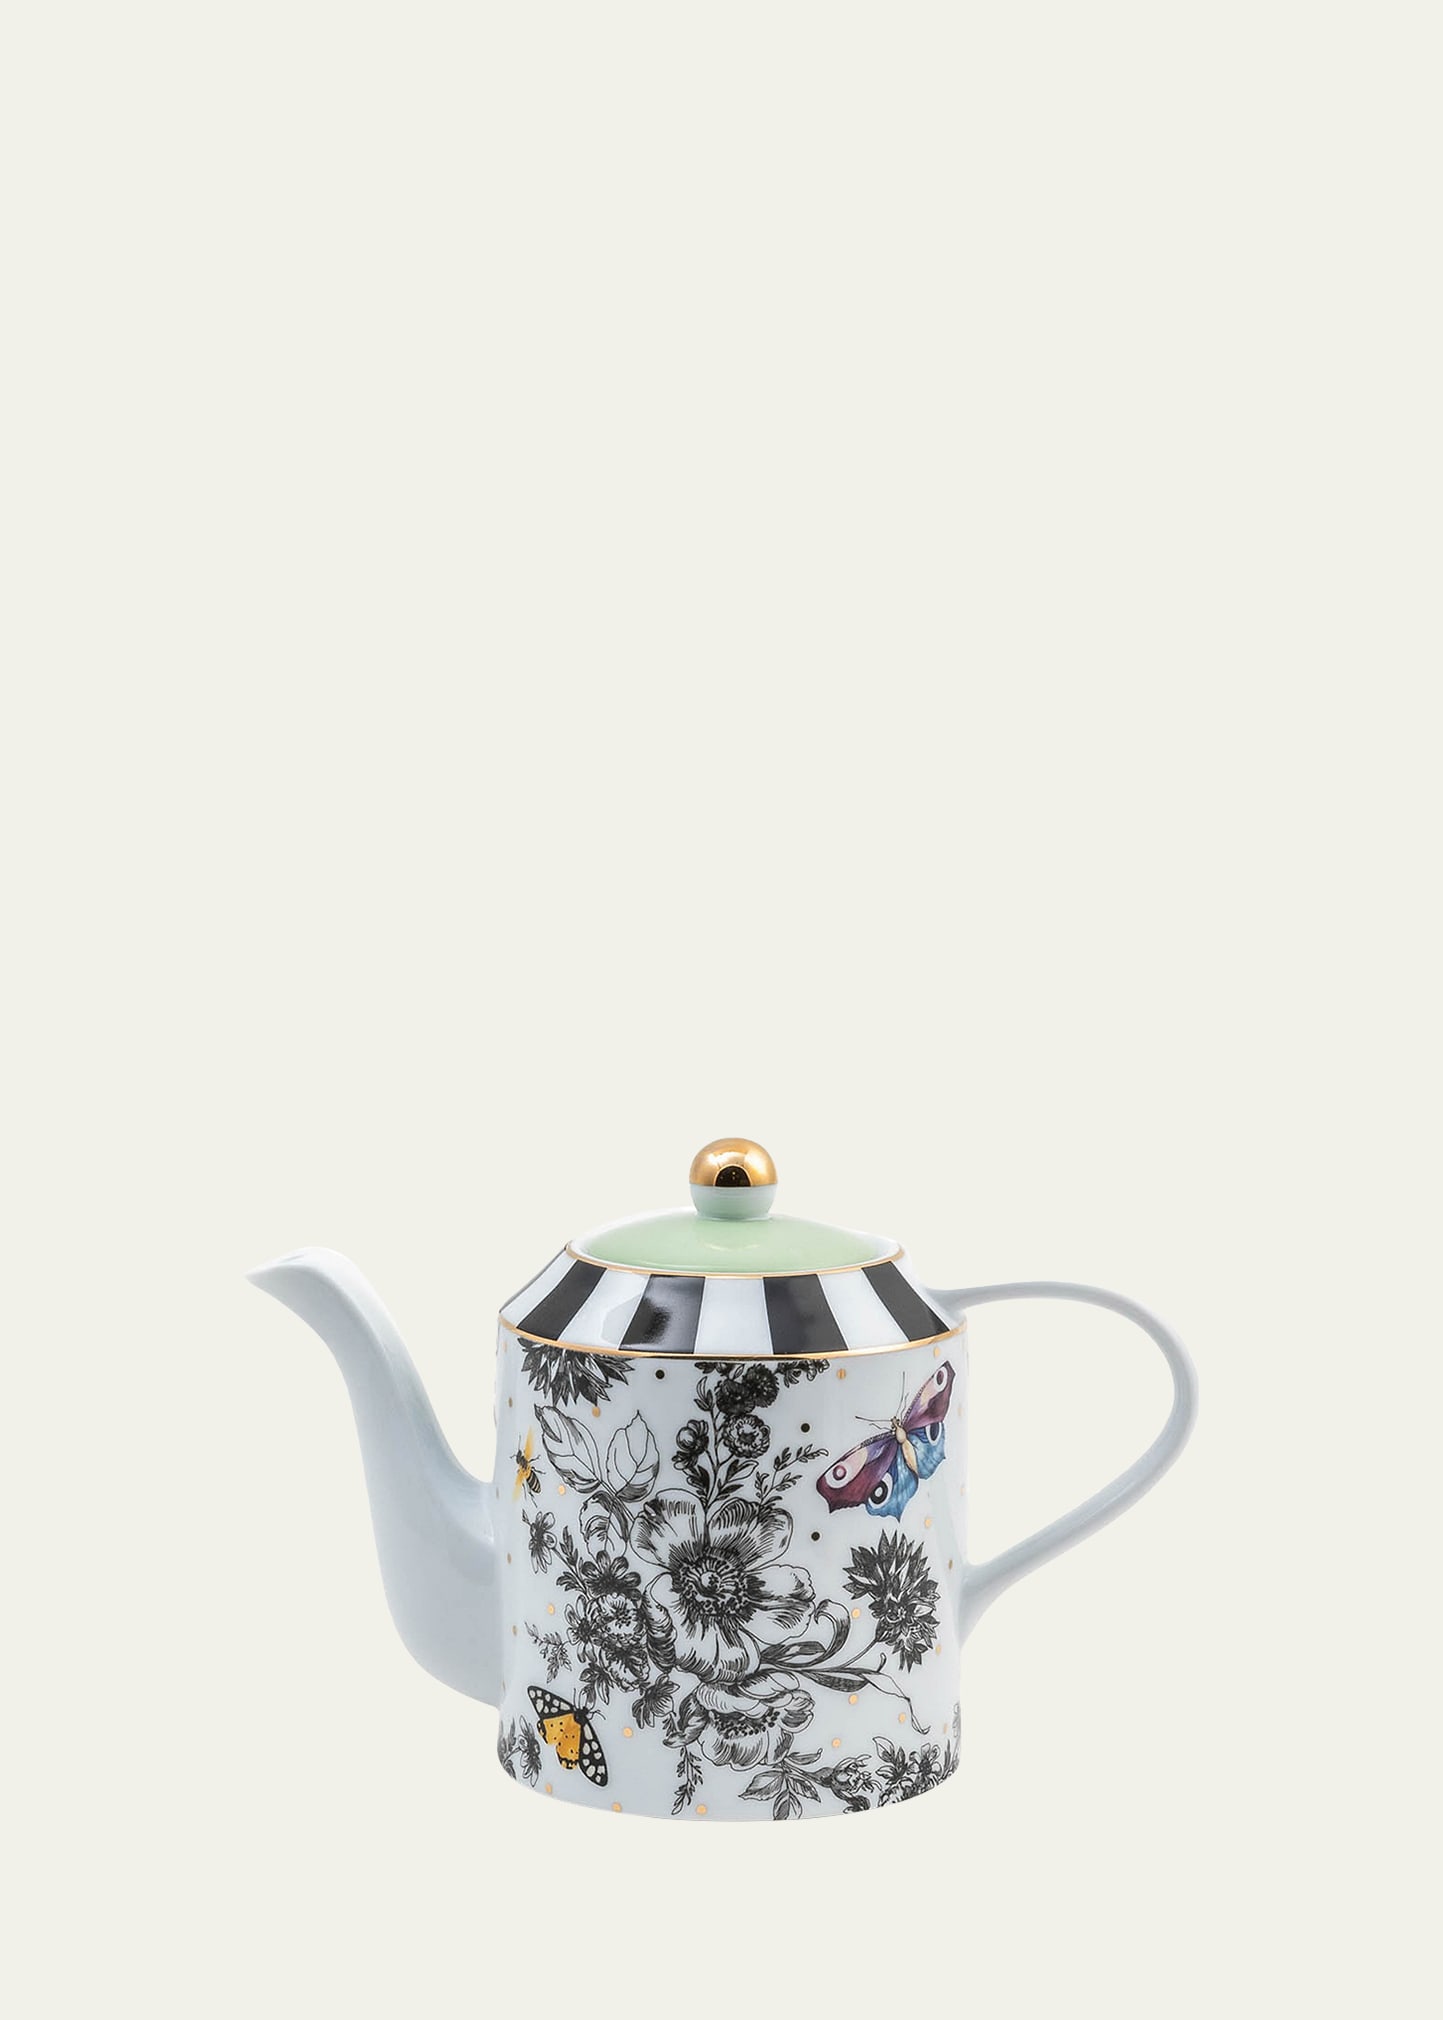 Mackenzie-childs Butterfly Toile Teapot In White